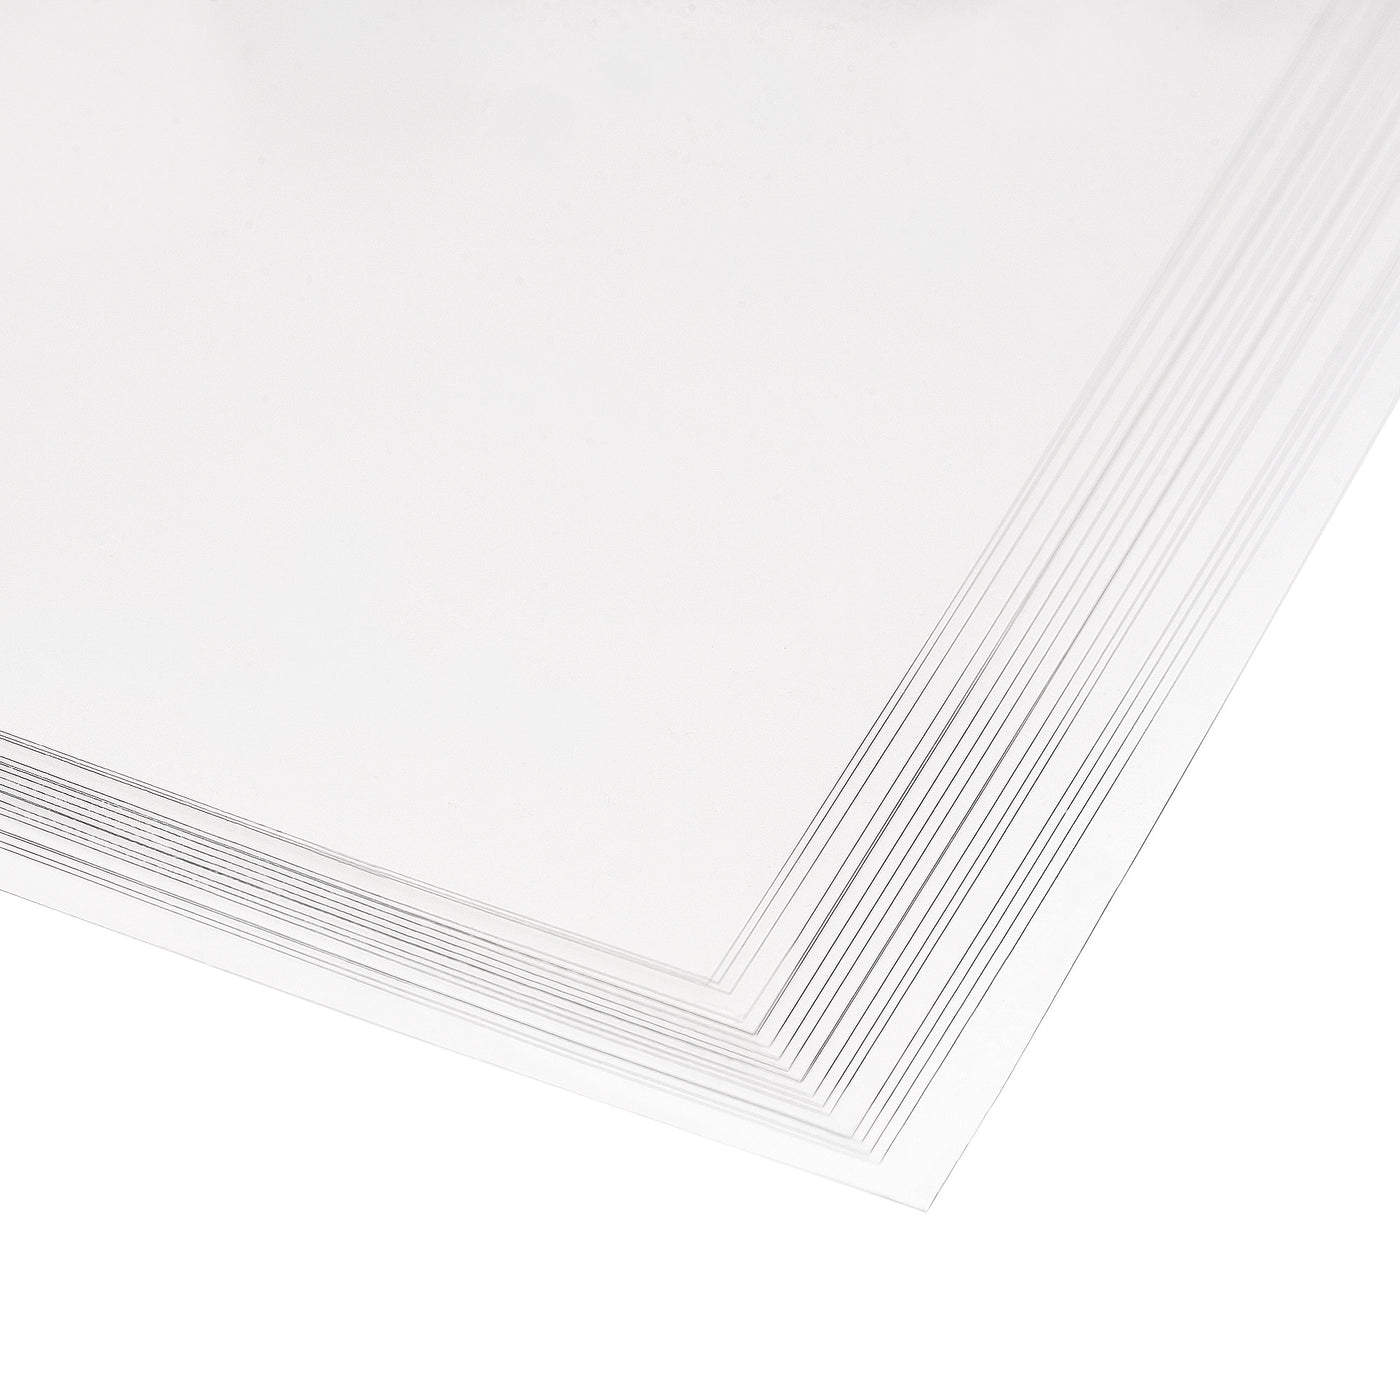 uxcell Uxcell 0.15mm Thick A4 Size Clear PVC Sheet 297mm x 210mm Flexible Cover Protector,Office,DIY Cutting,20pcs